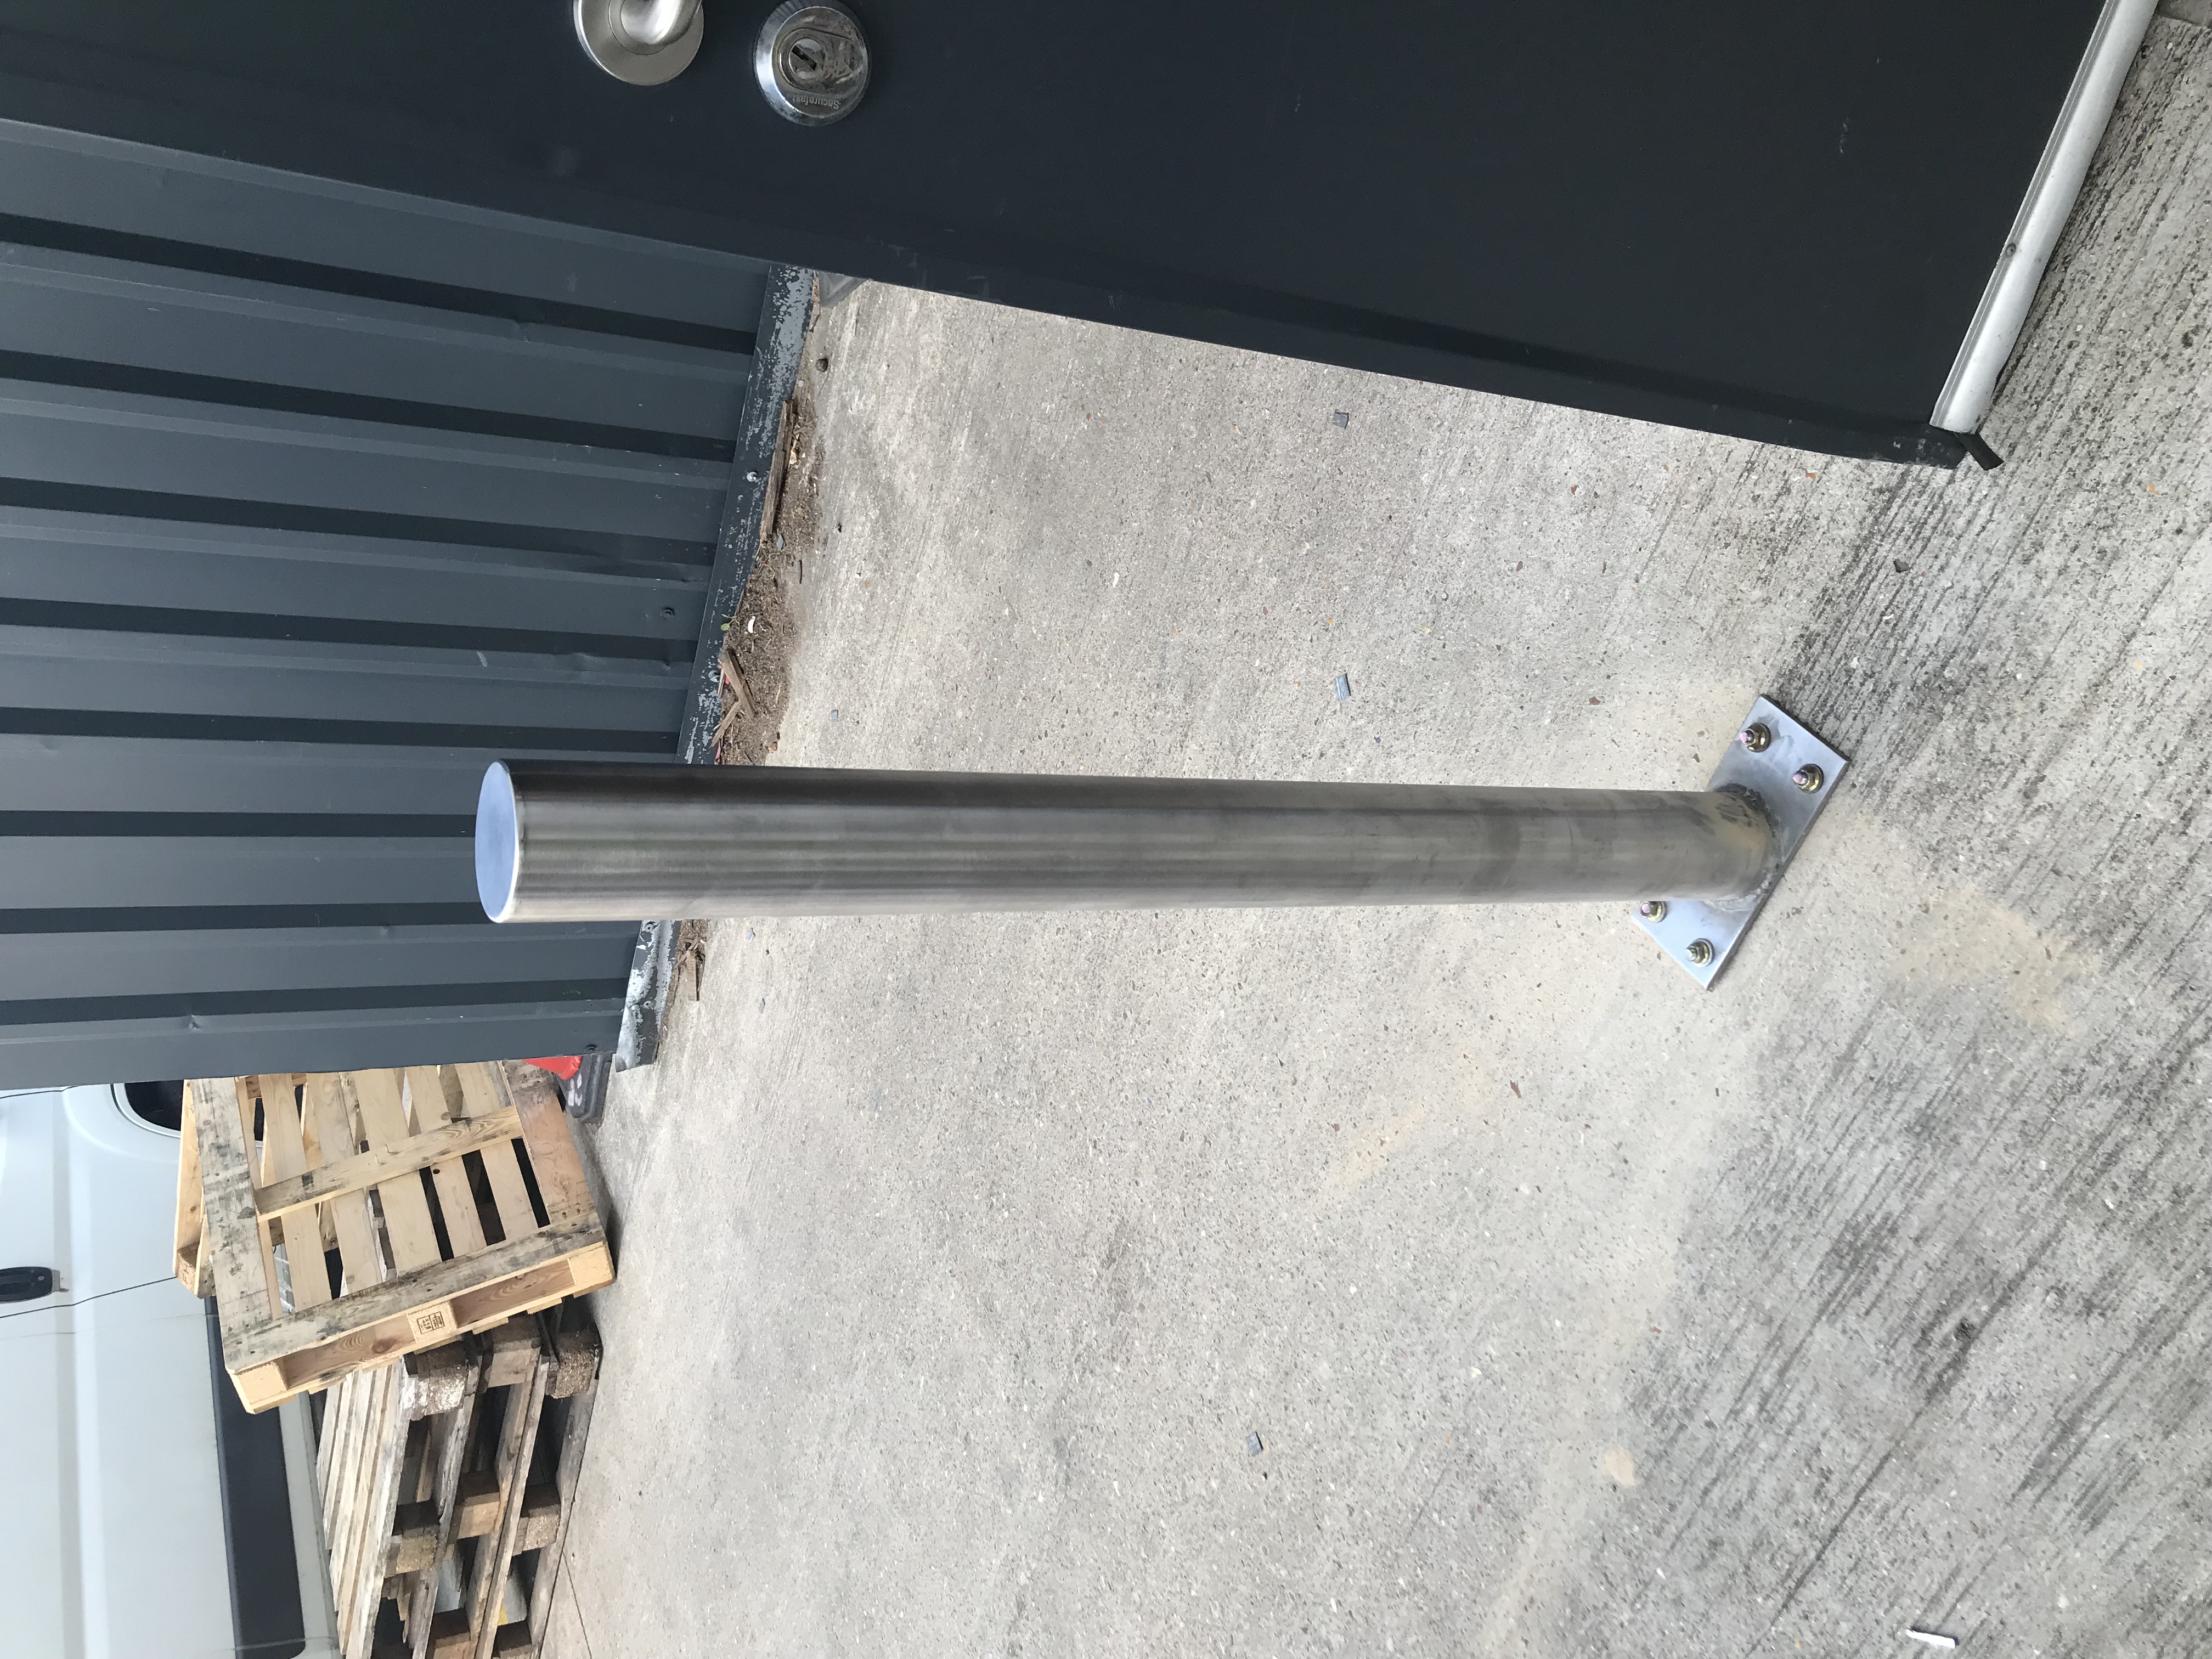 Stainless Steel Post